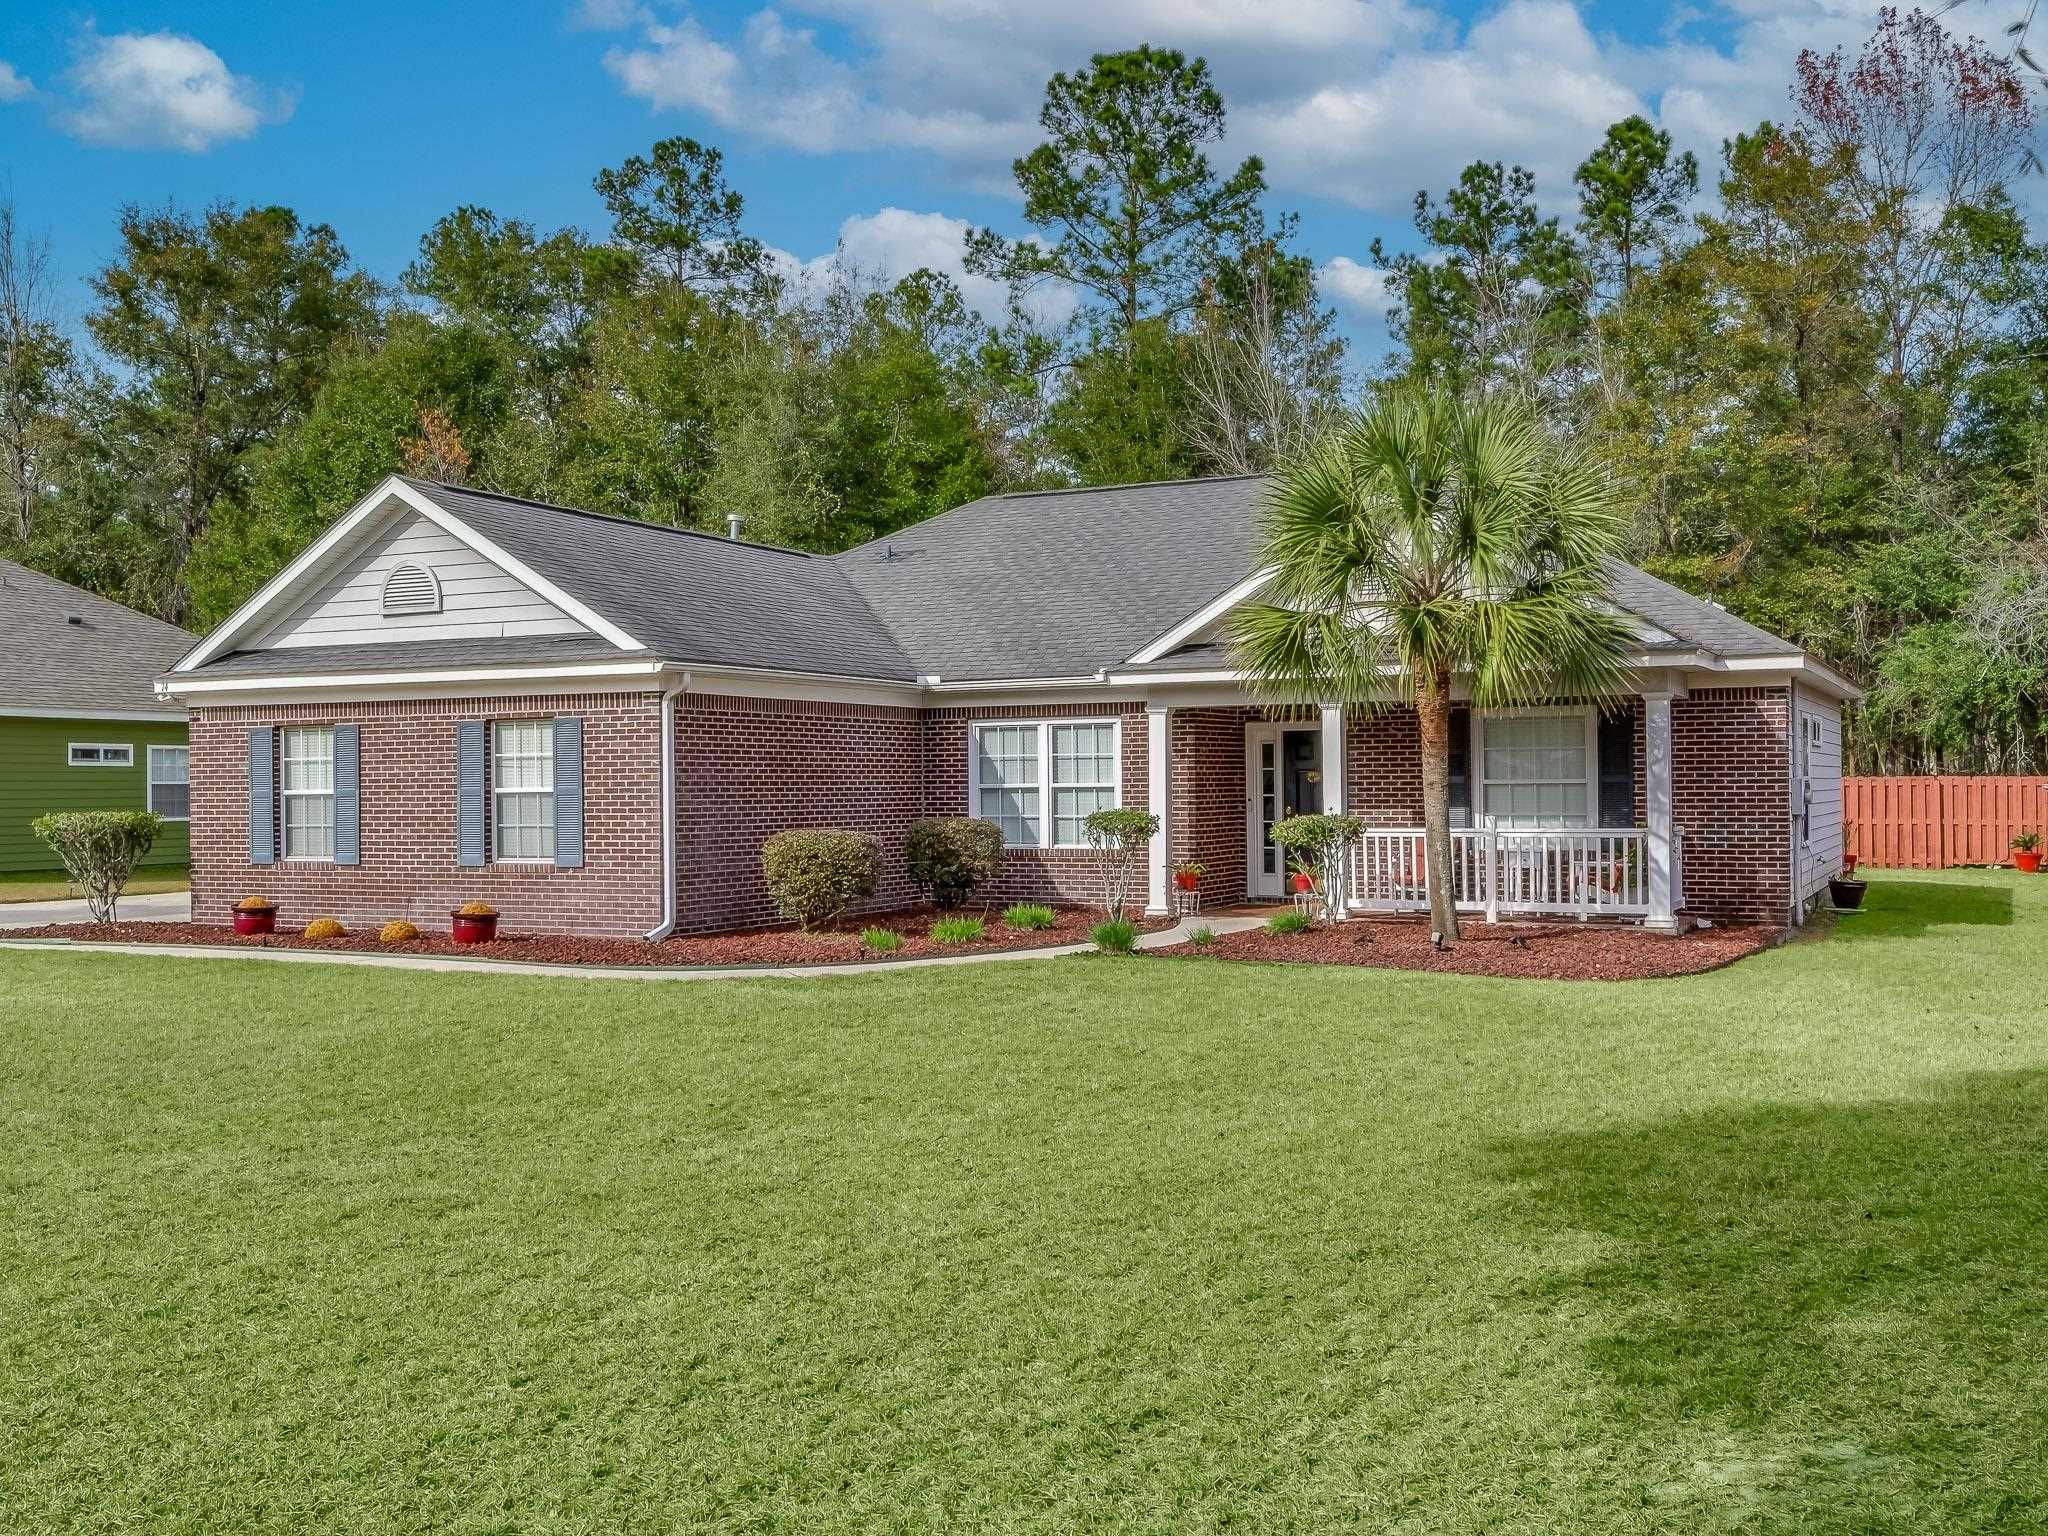 14 Nuthatch Trail,CRAWFORDVILLE,Florida 32327,3 Bedrooms Bedrooms,2 BathroomsBathrooms,Detached single family,14 Nuthatch Trail,369609